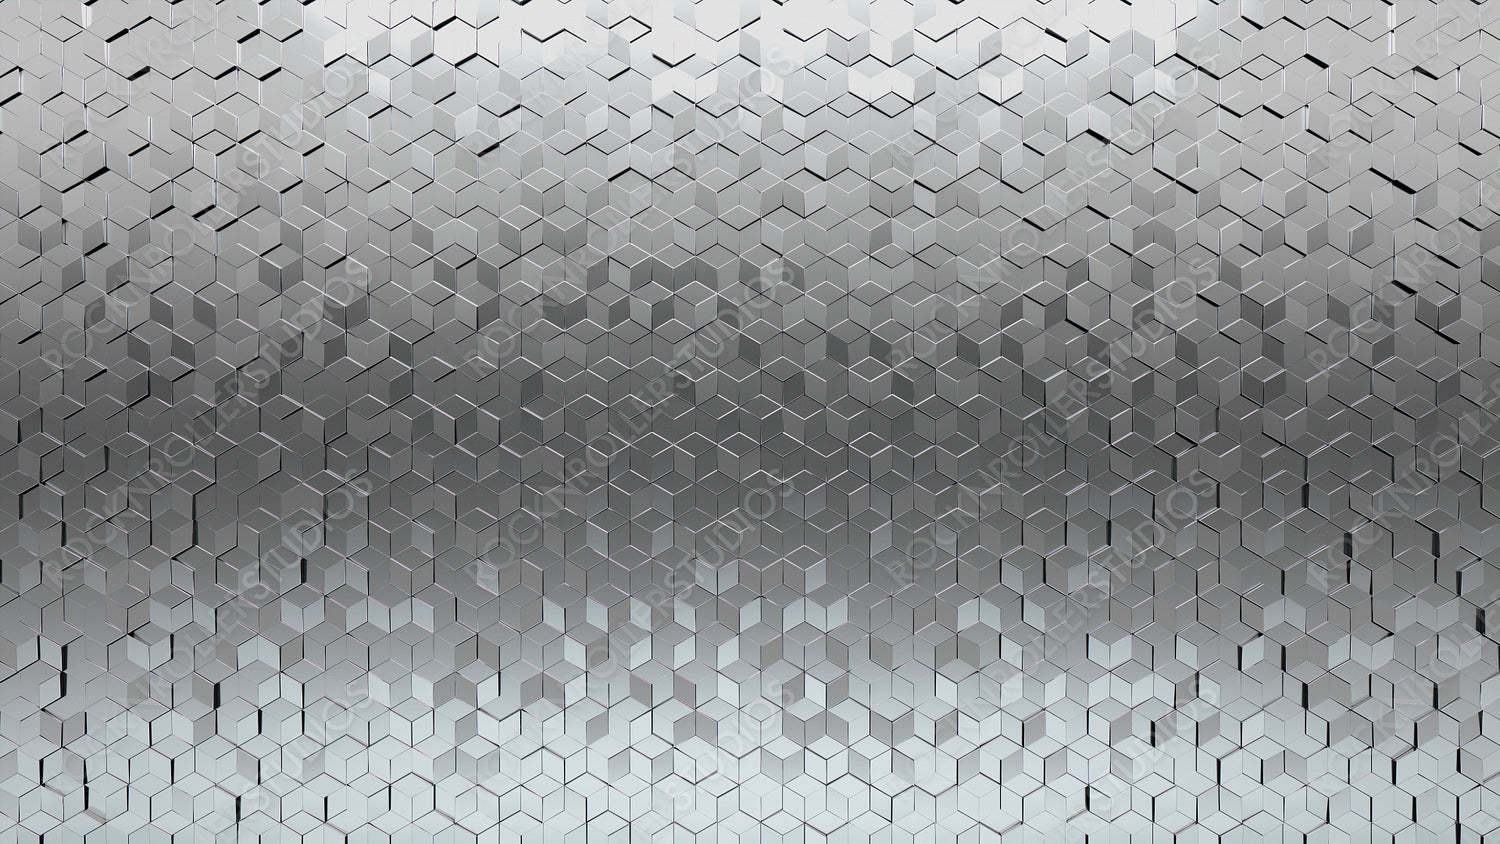 Glossy Tiles arranged to create a 3D wall. Diamond Shaped, Silver Background formed from Luxurious blocks. 3D Render